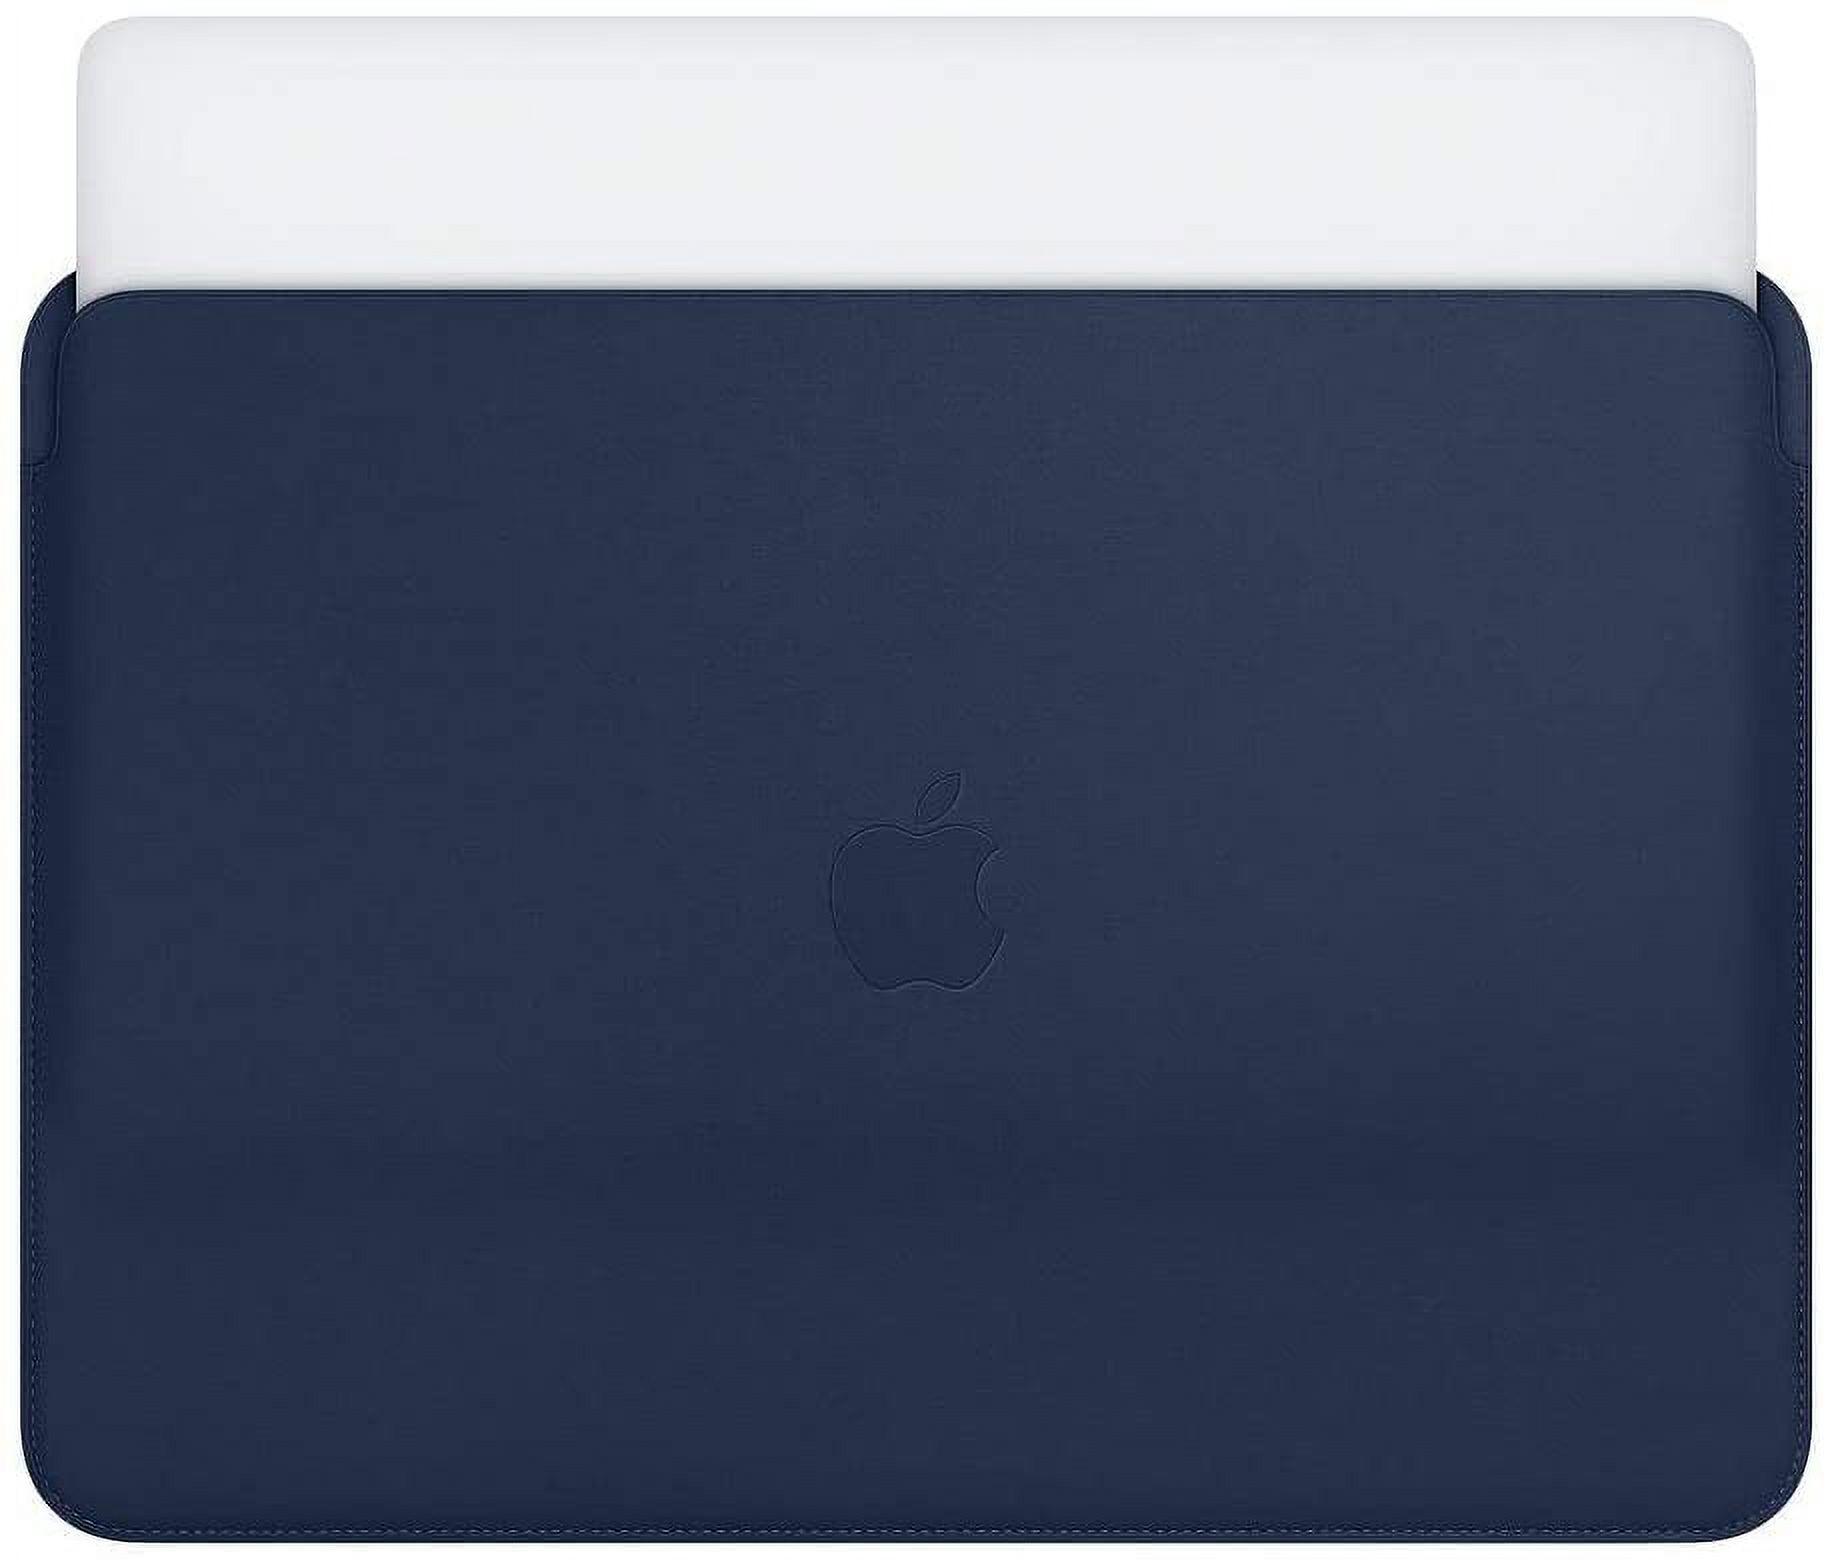 MacbookPro 13 Leather Sleeve - Midnight Blue for 13-inch MacBookAir and MacBookPro MRQL2ZM/A - image 3 of 3